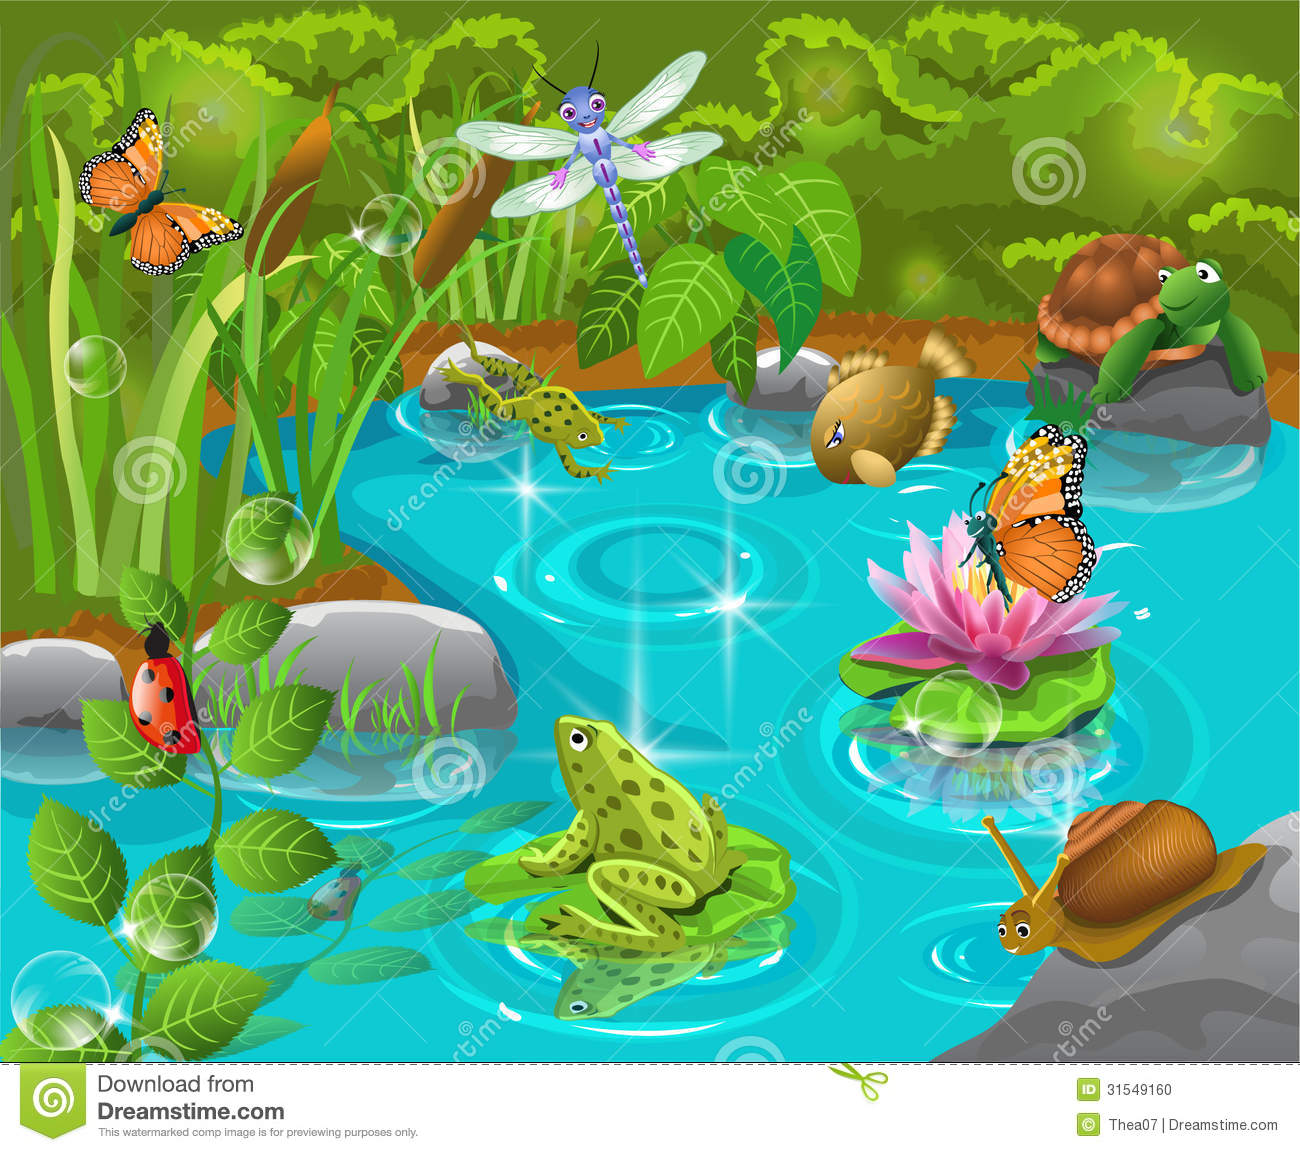 Pond Animals Living Happily Together